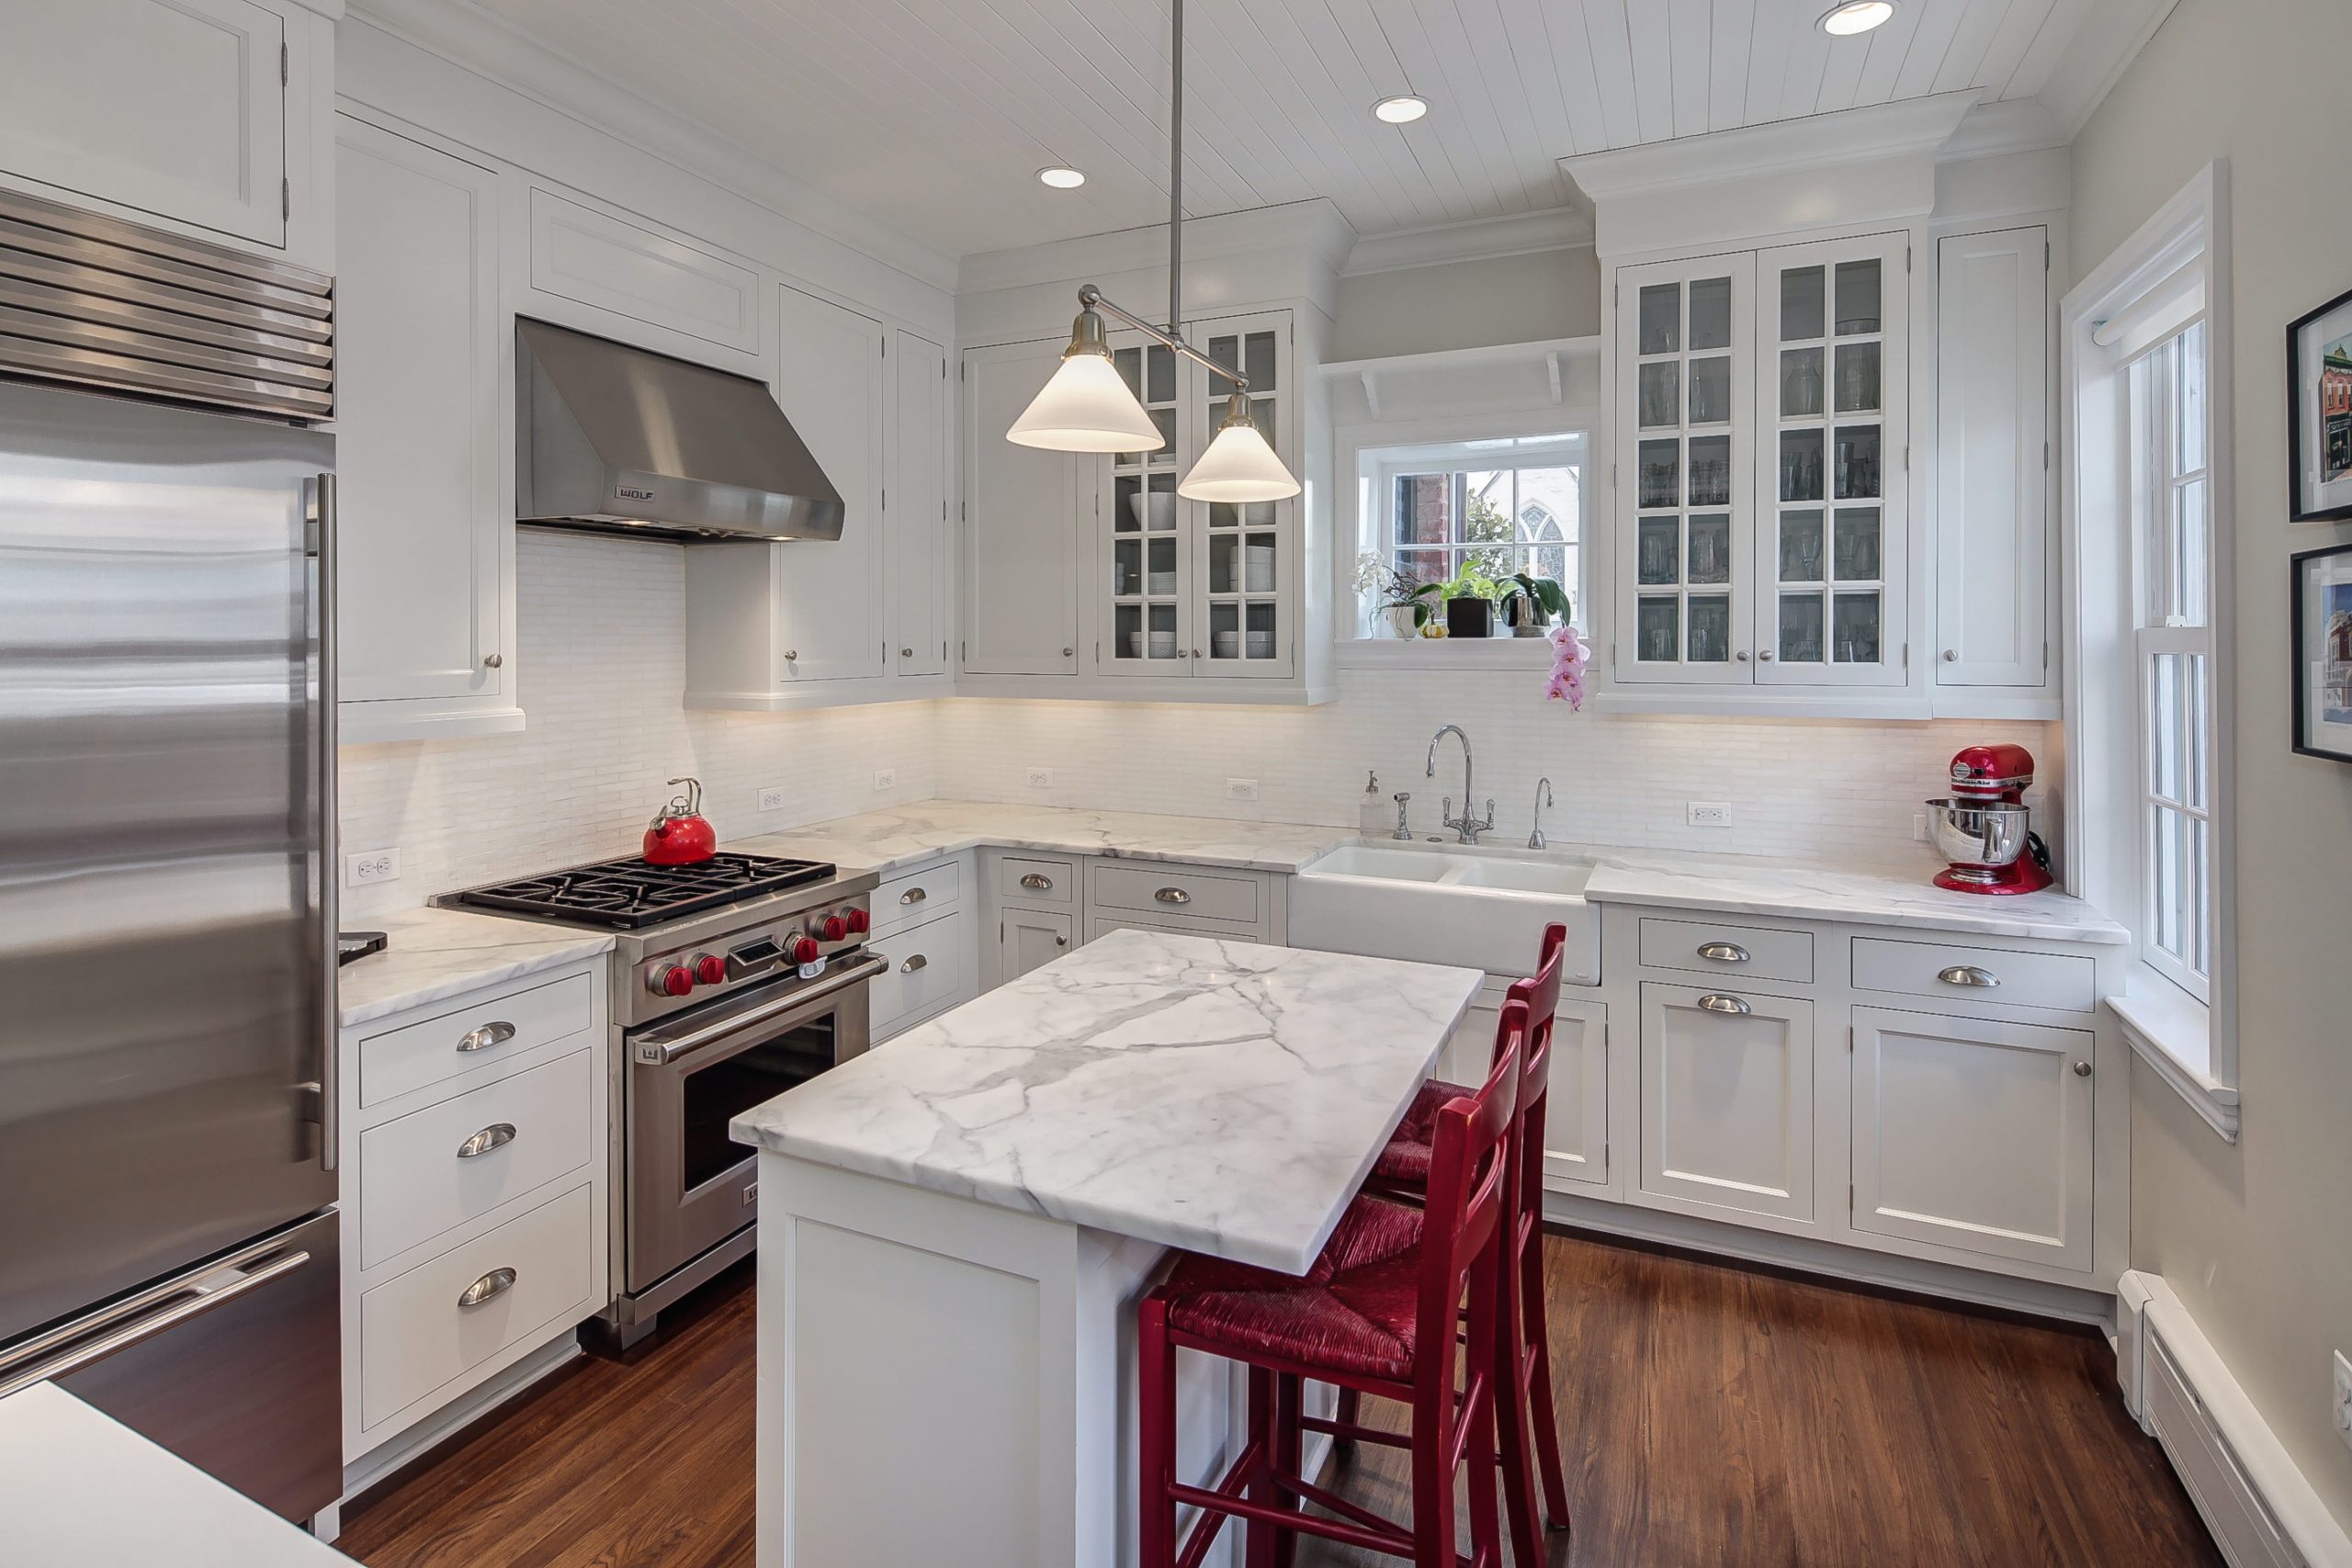 Choose The Right Countertop For You